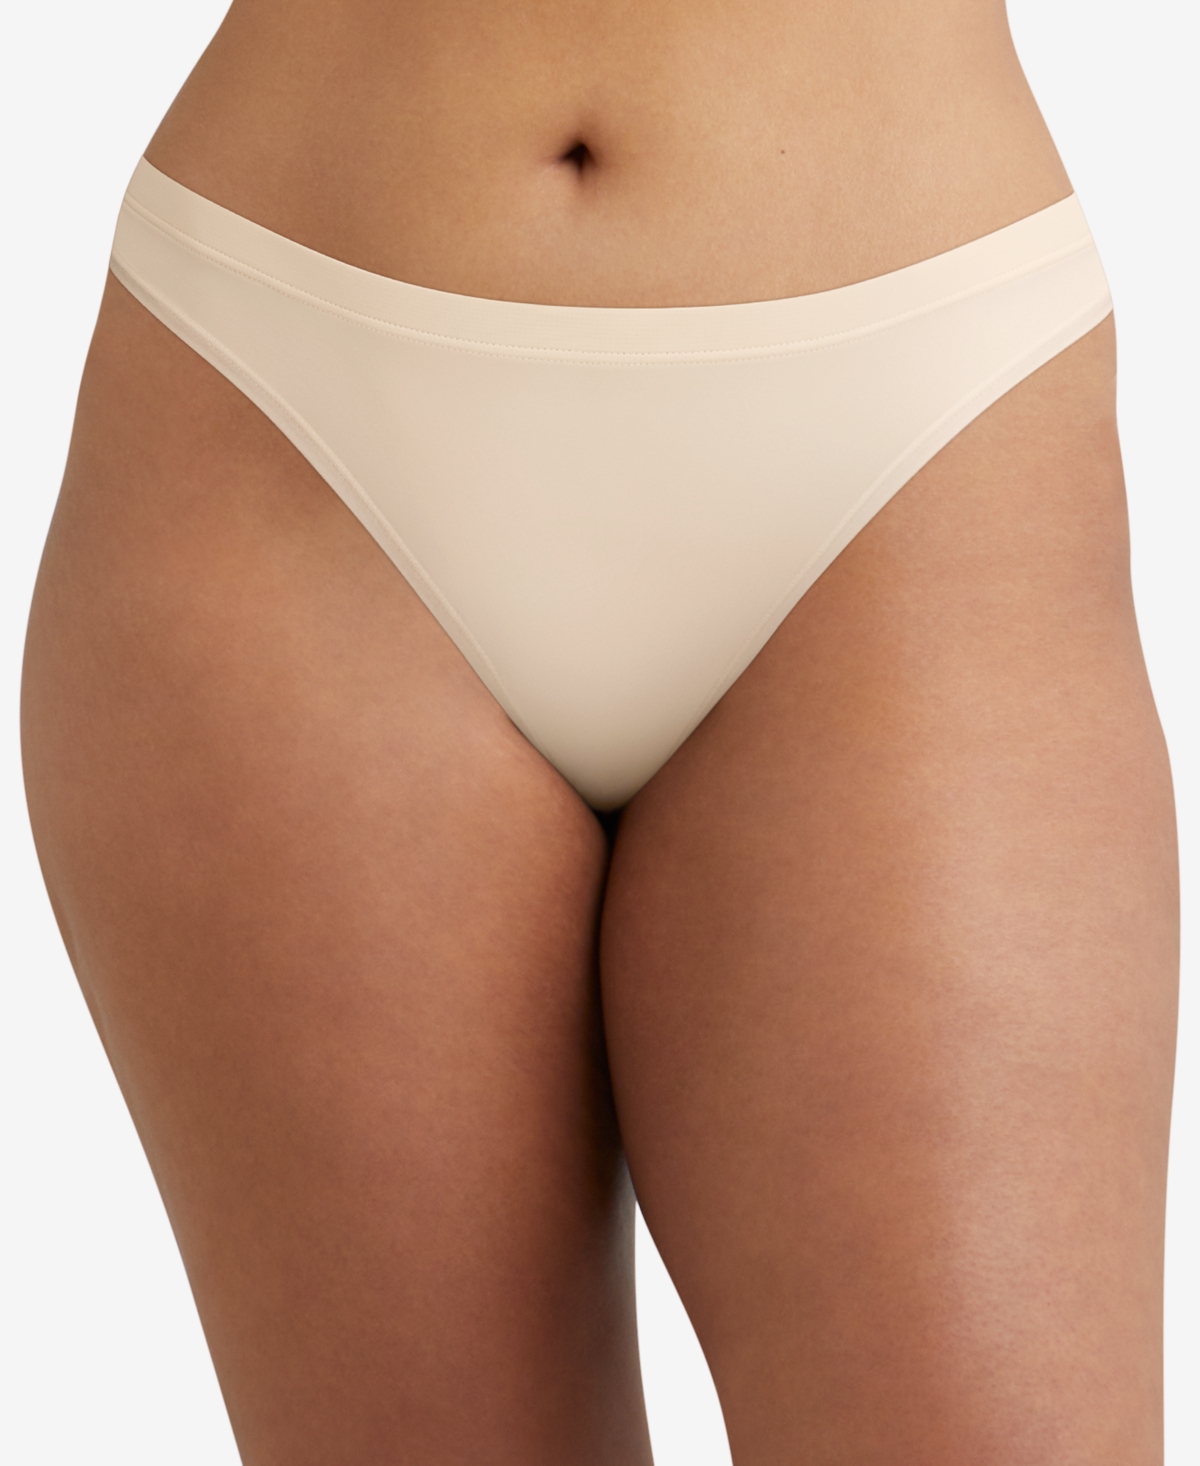 Women's Barely There Invisible Look Thong Dmbttg - Wild Cameo